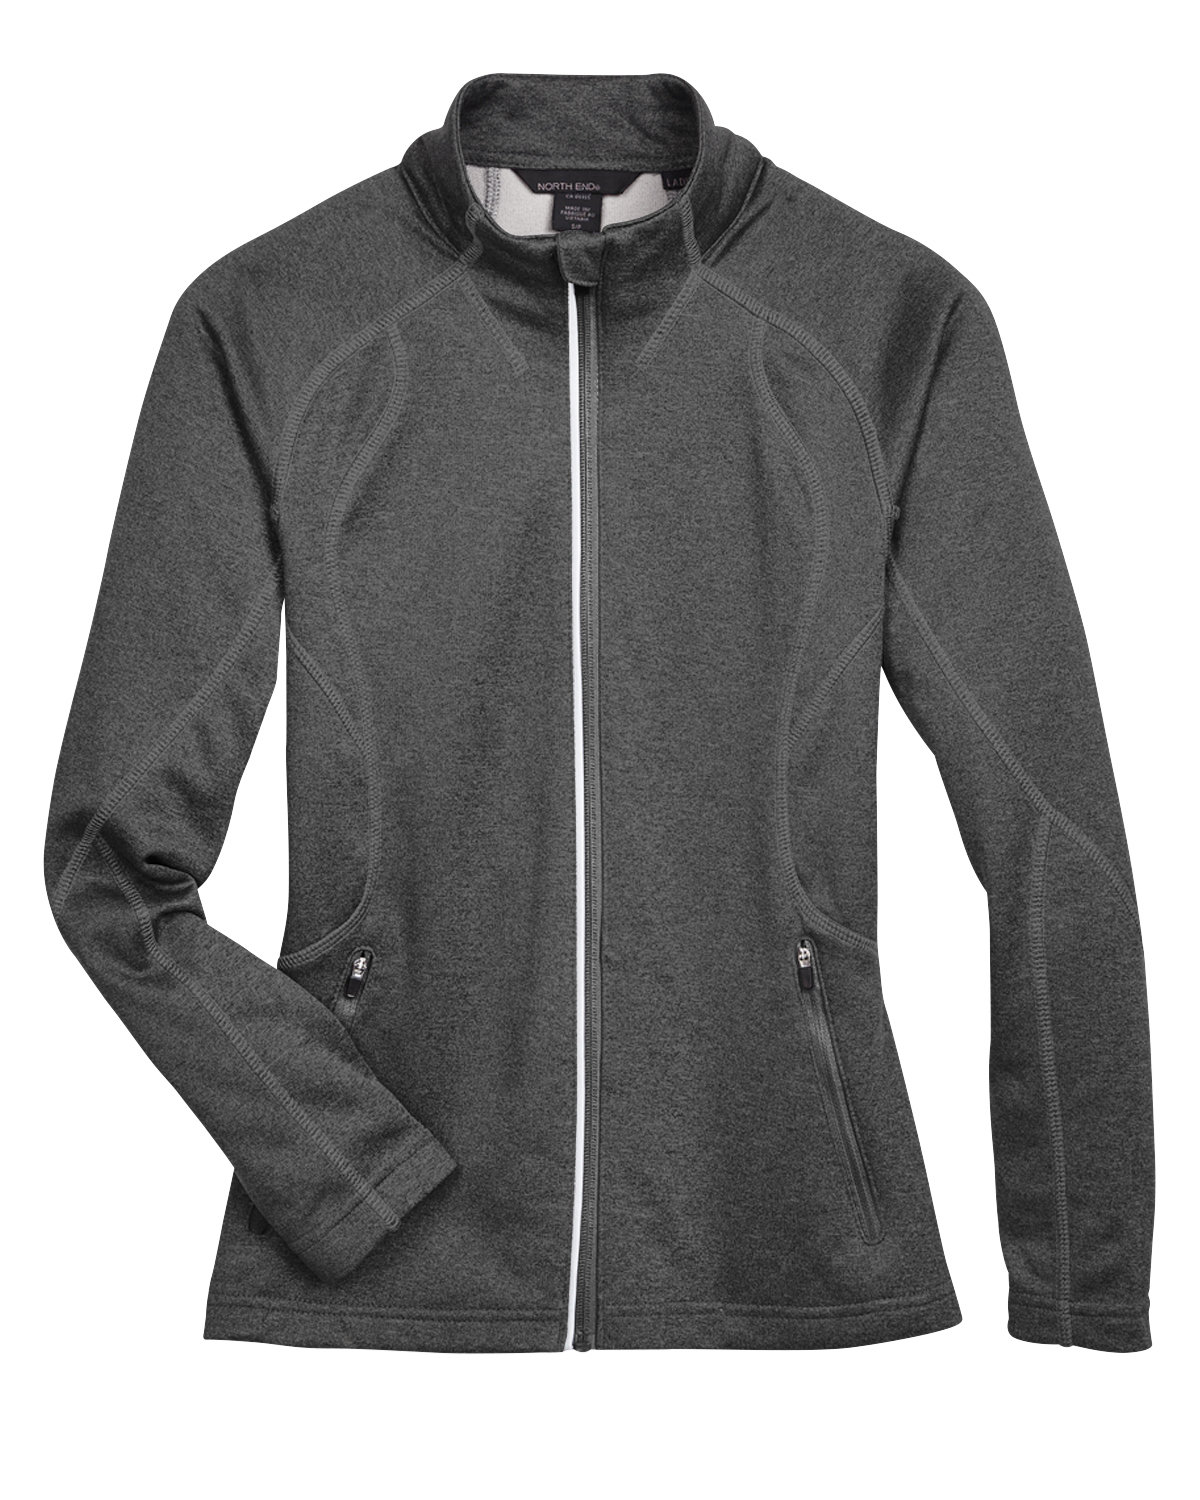 Picture of North End Women's Gravity Performance Fleece Jacket